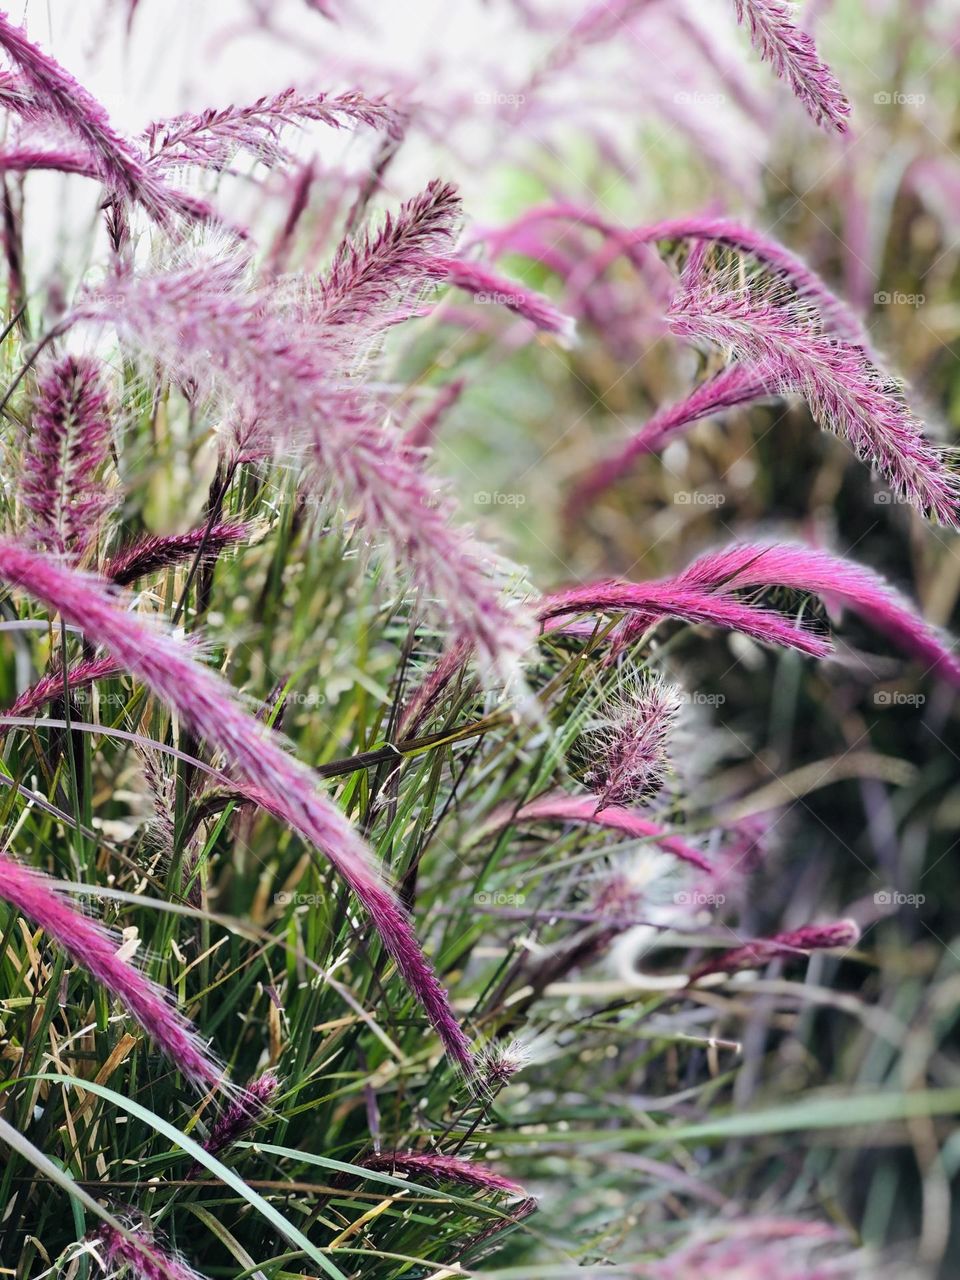 Magenta flower grasses in the field, magenta in California, magenta in nature, magenta in the fields, color of the year 